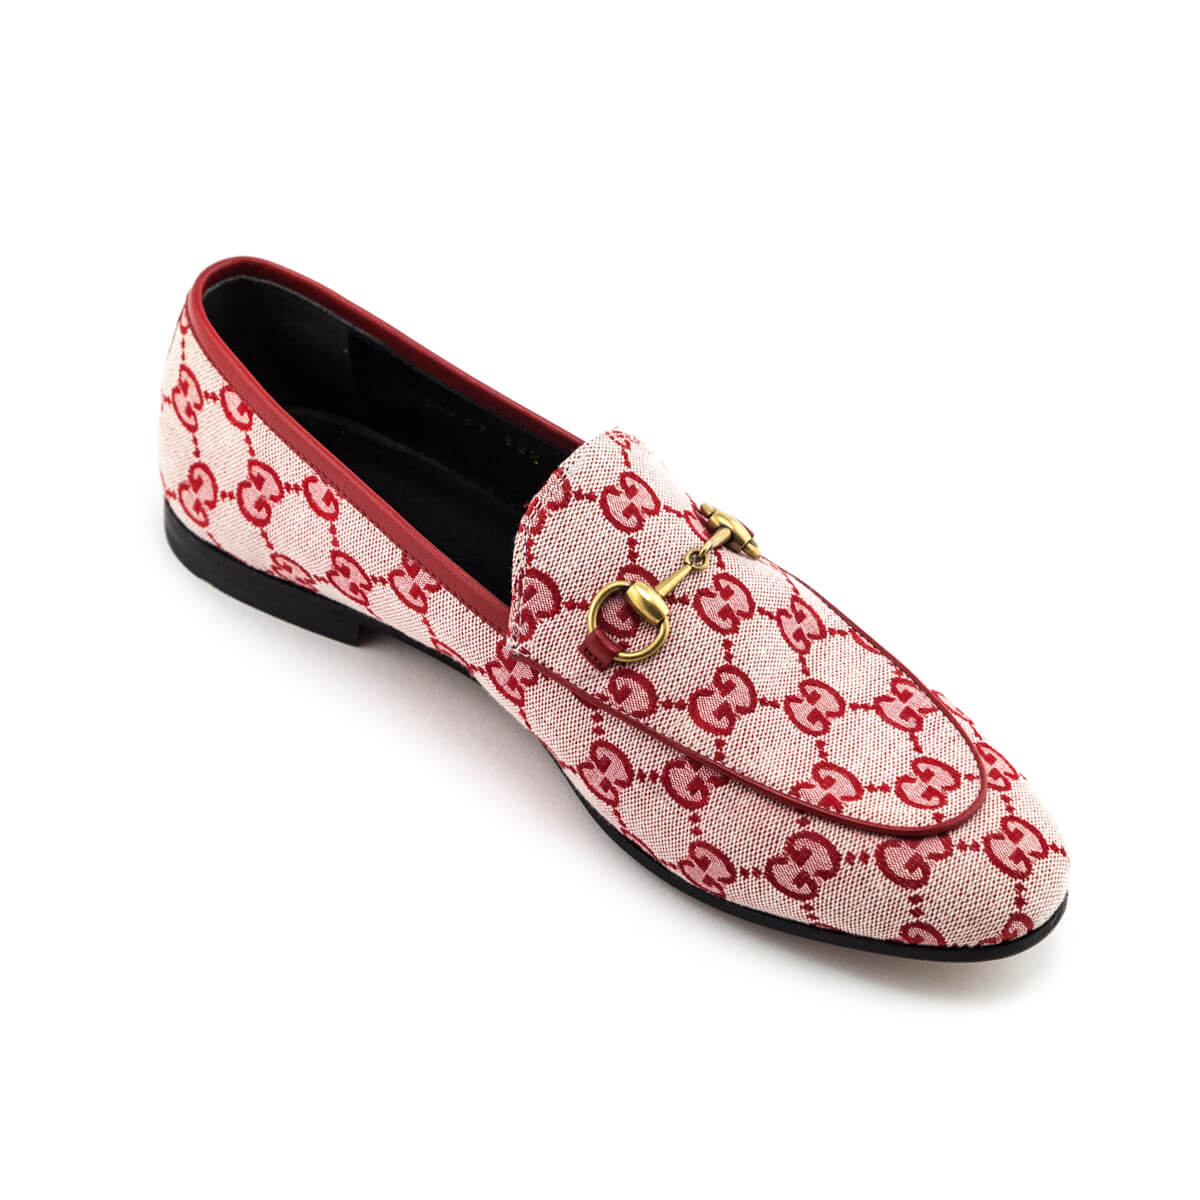 Gucci Red Canvas GG Monogram Jordaan Loafers Size US 8.5 | EU 38.5 - Love that Bag etc - Preowned Authentic Designer Handbags & Preloved Fashions